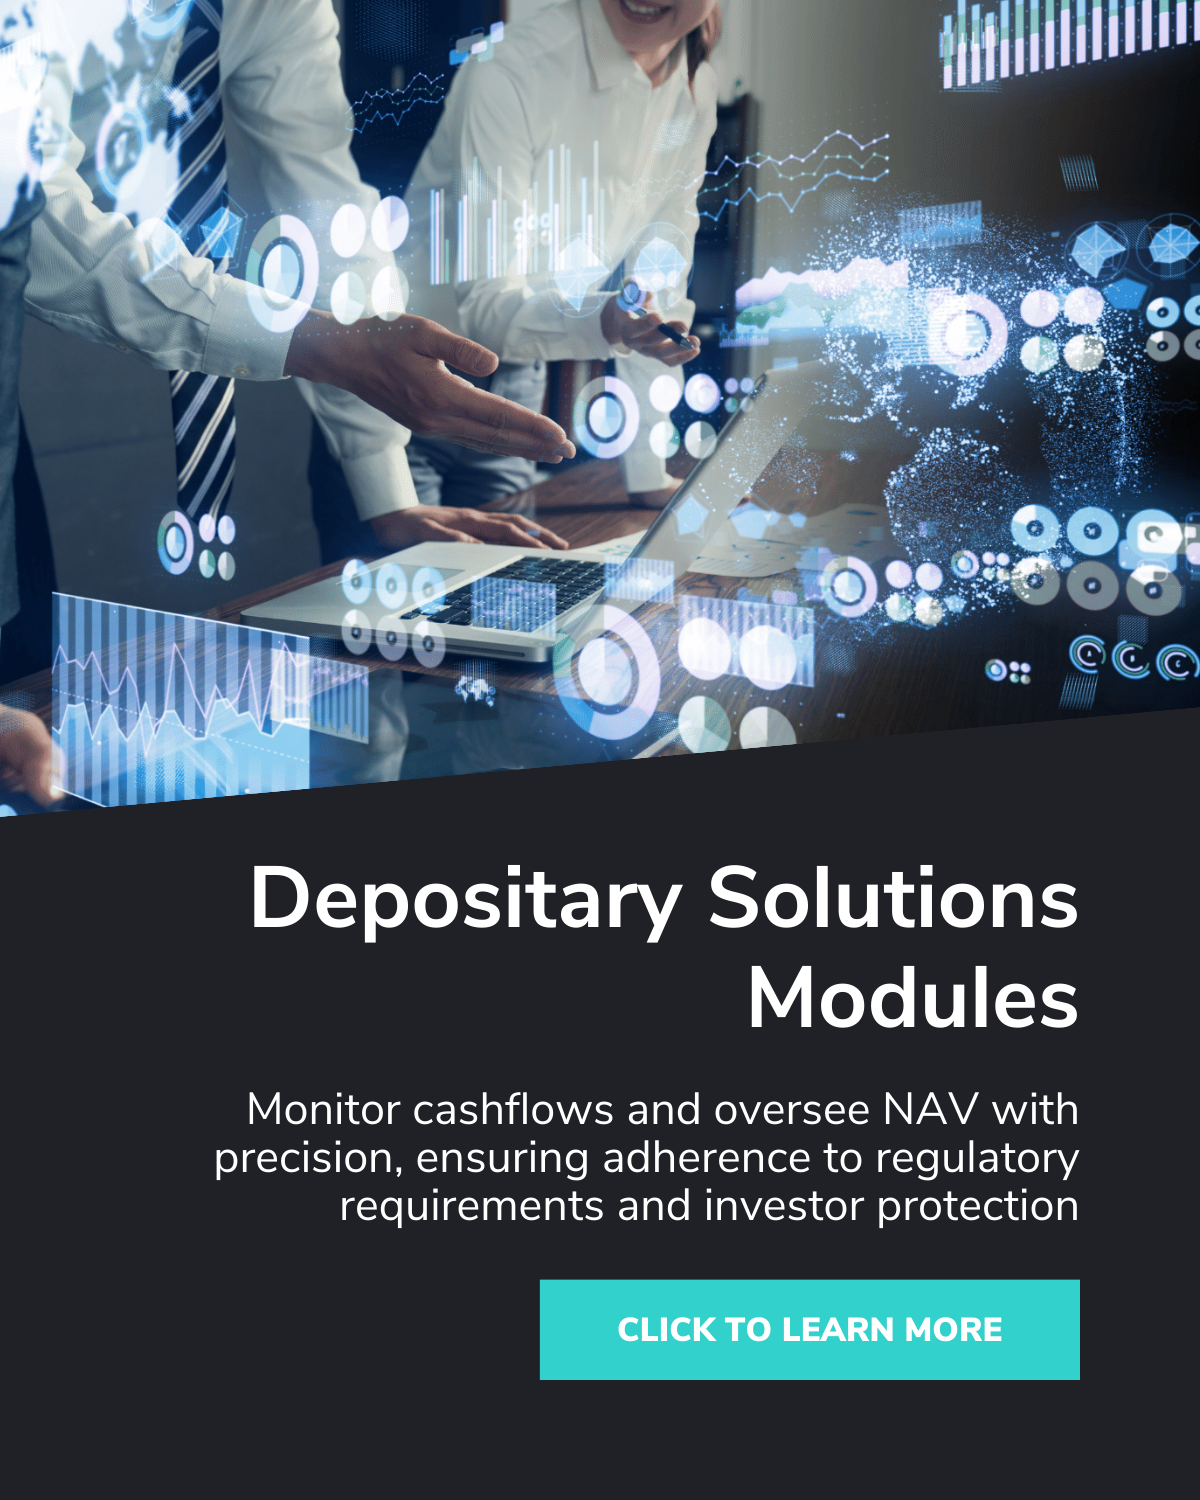 Depositary Solutions Modules